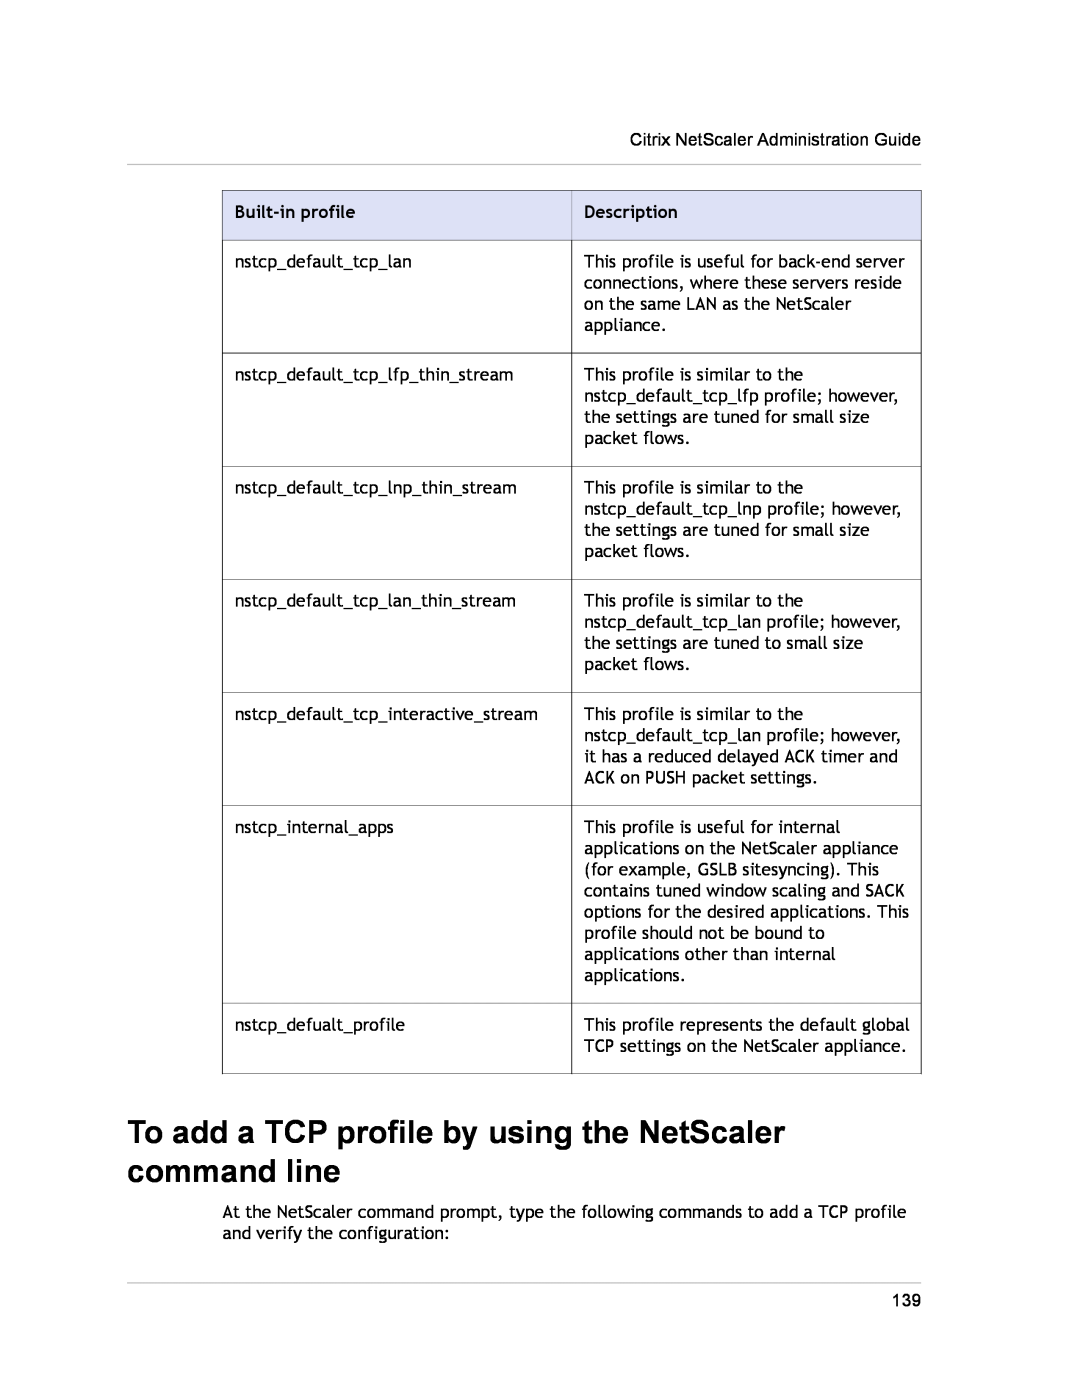 Citrix Systems CITRIX NETSCALER 9.3 manual To add a TCP profile by using the NetScaler command line, Built-in profile 